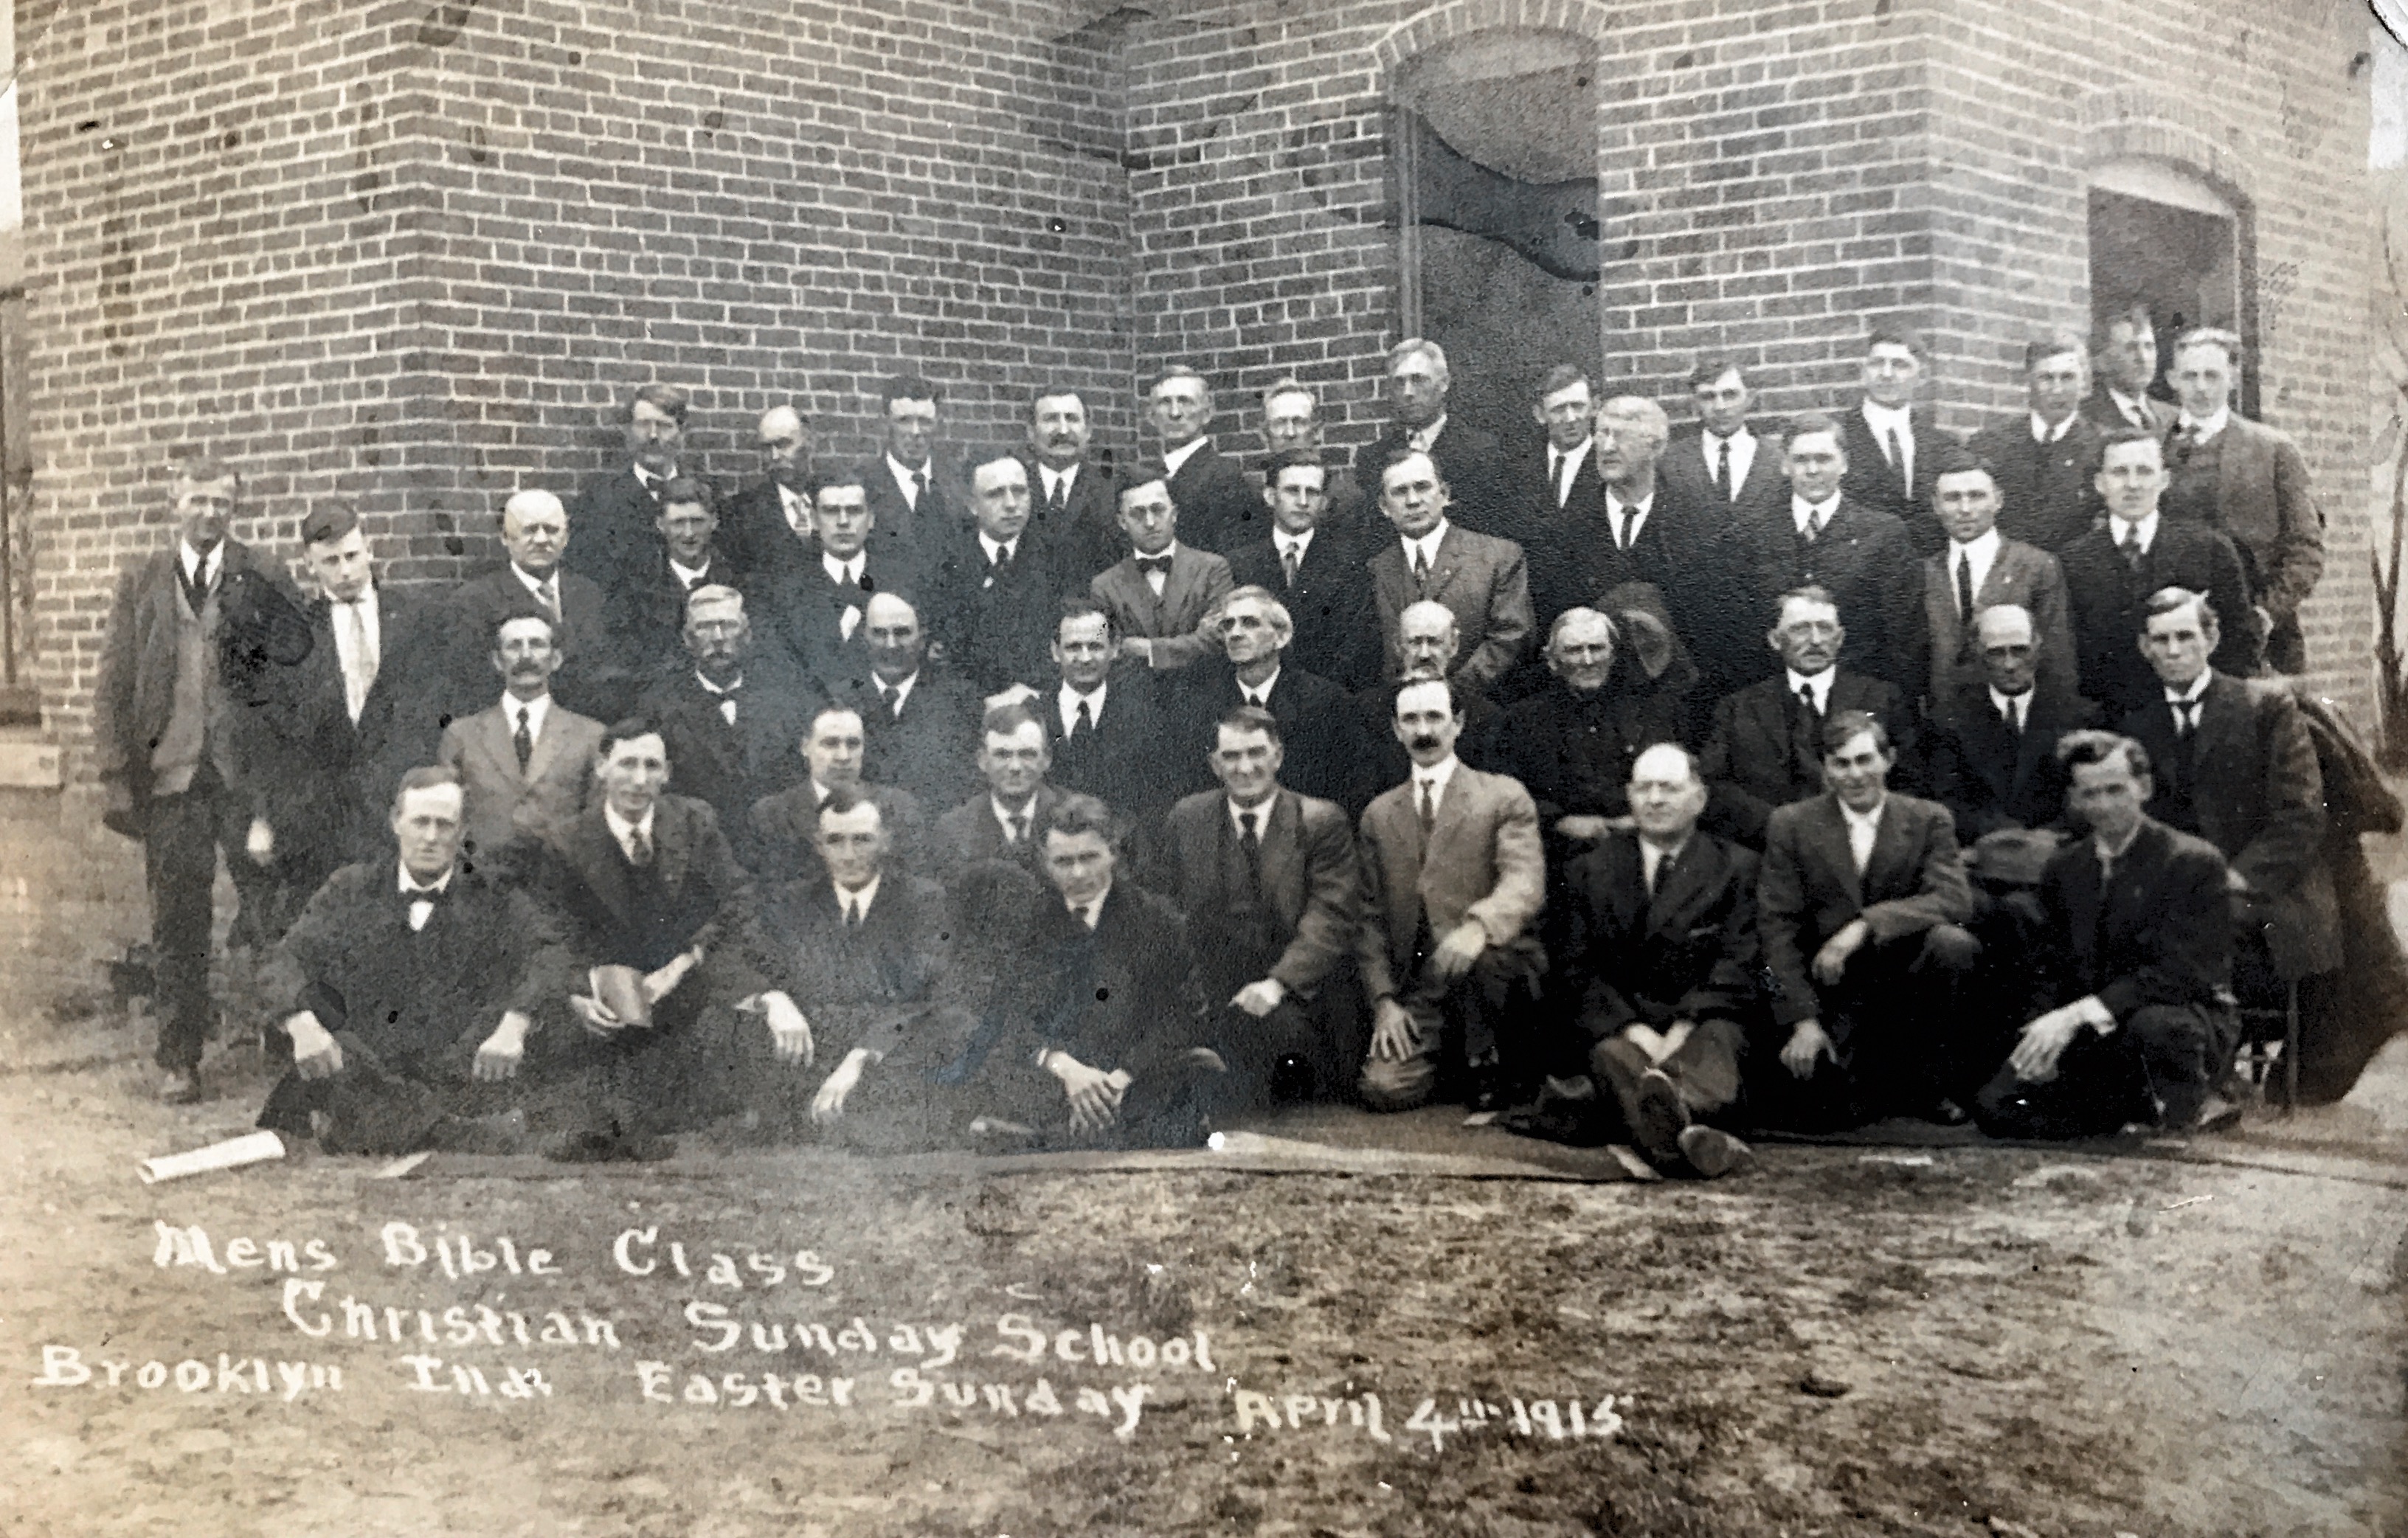 1915 Mens Bible Class Christian Sunday School-Brooklyn IN.Easter Sunday-Easter Sunday April 4th 1915